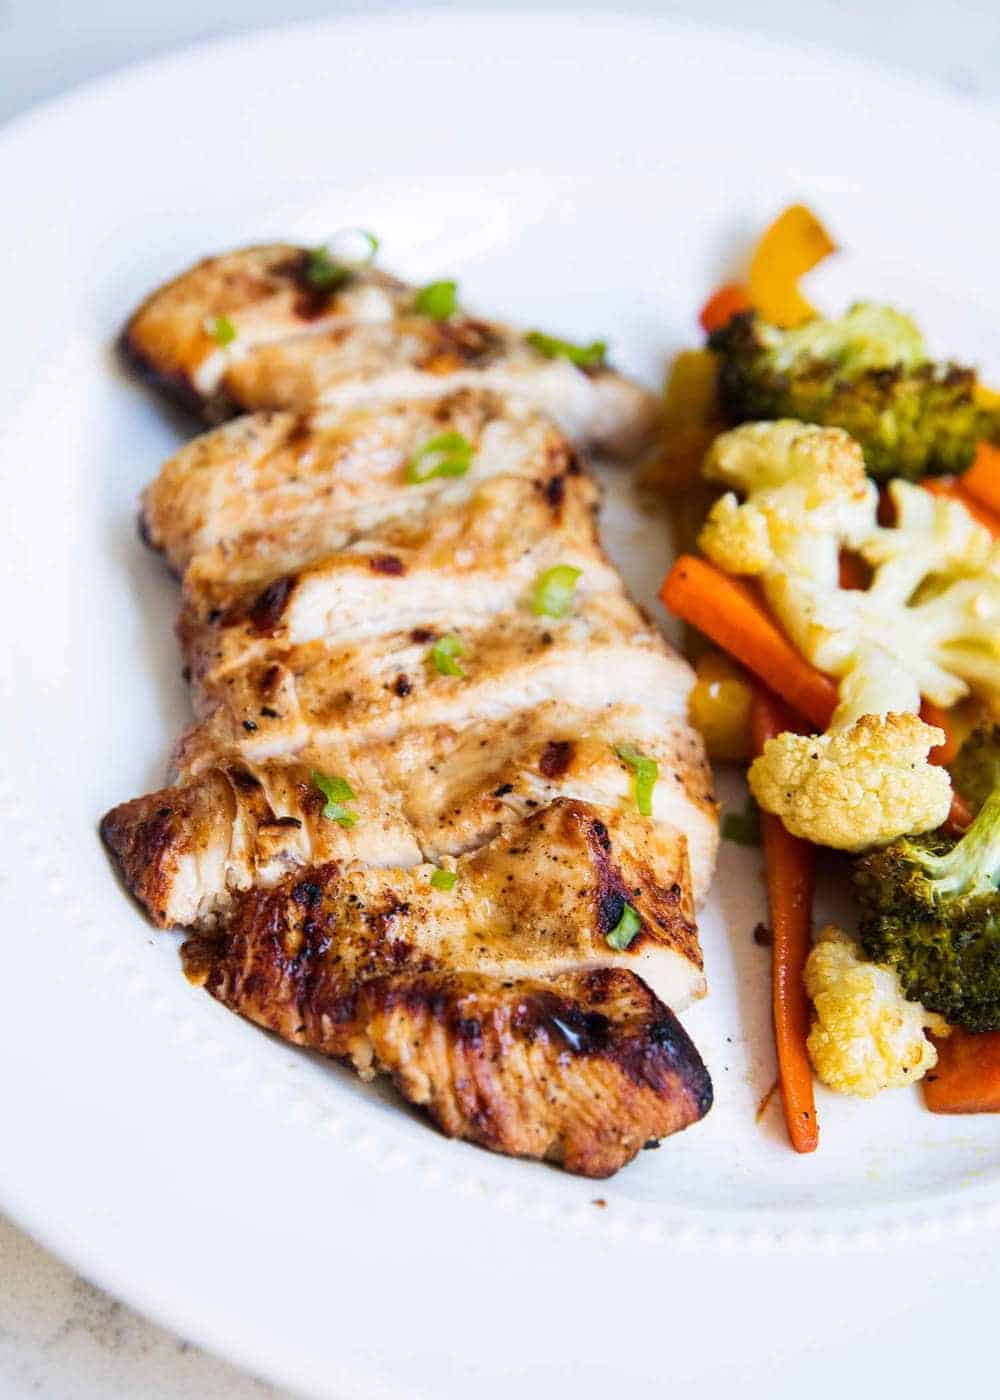 Sliced grilled chicken on plate with vegetables.